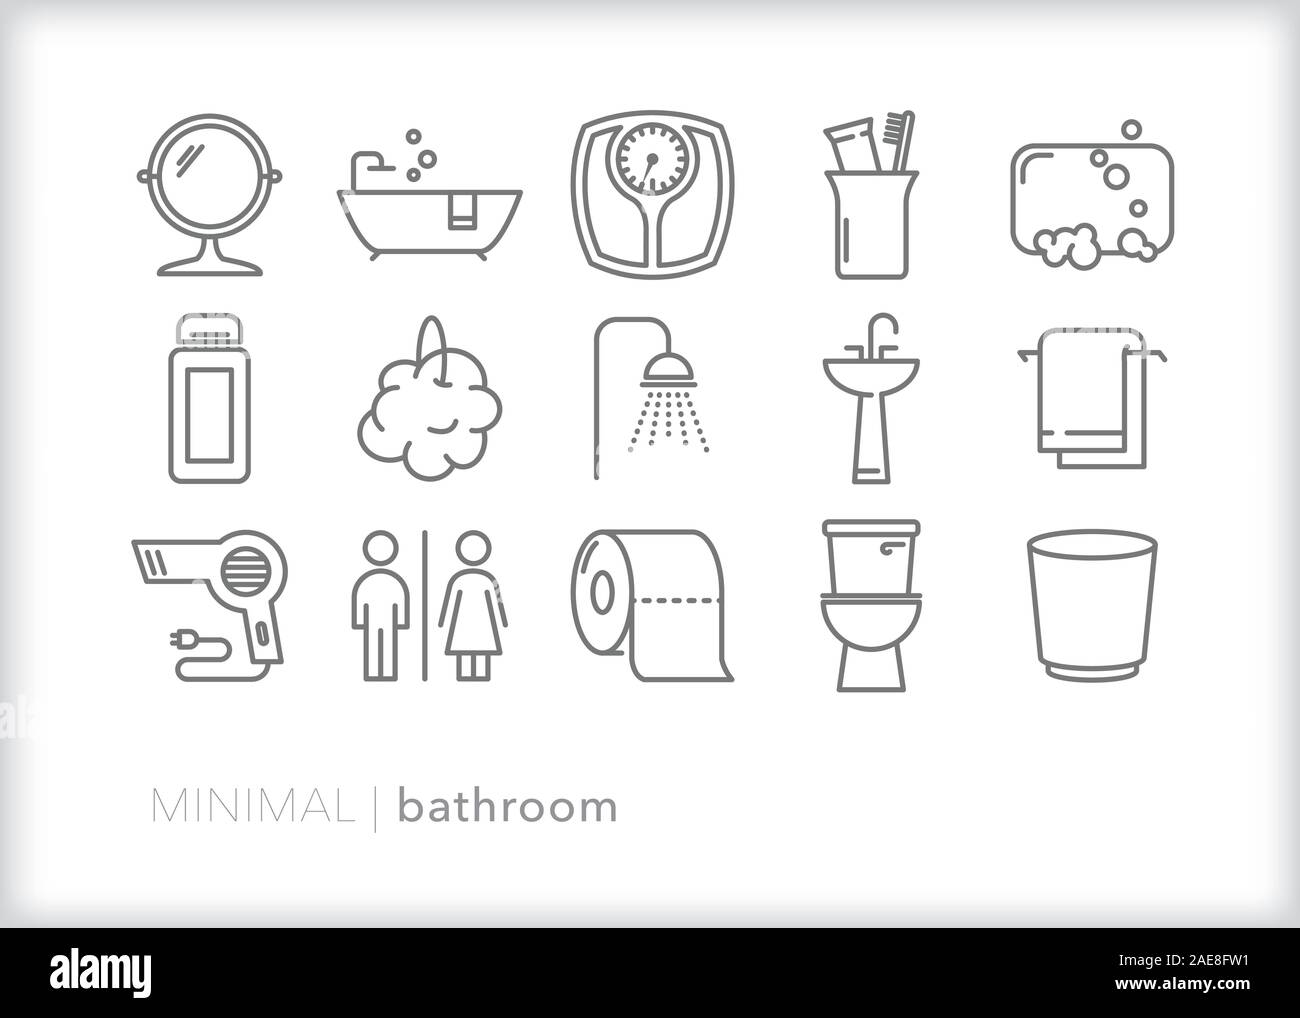 Set of bathroom line icons for cleaning, daily routine, hygiene and relaxing Stock Vector